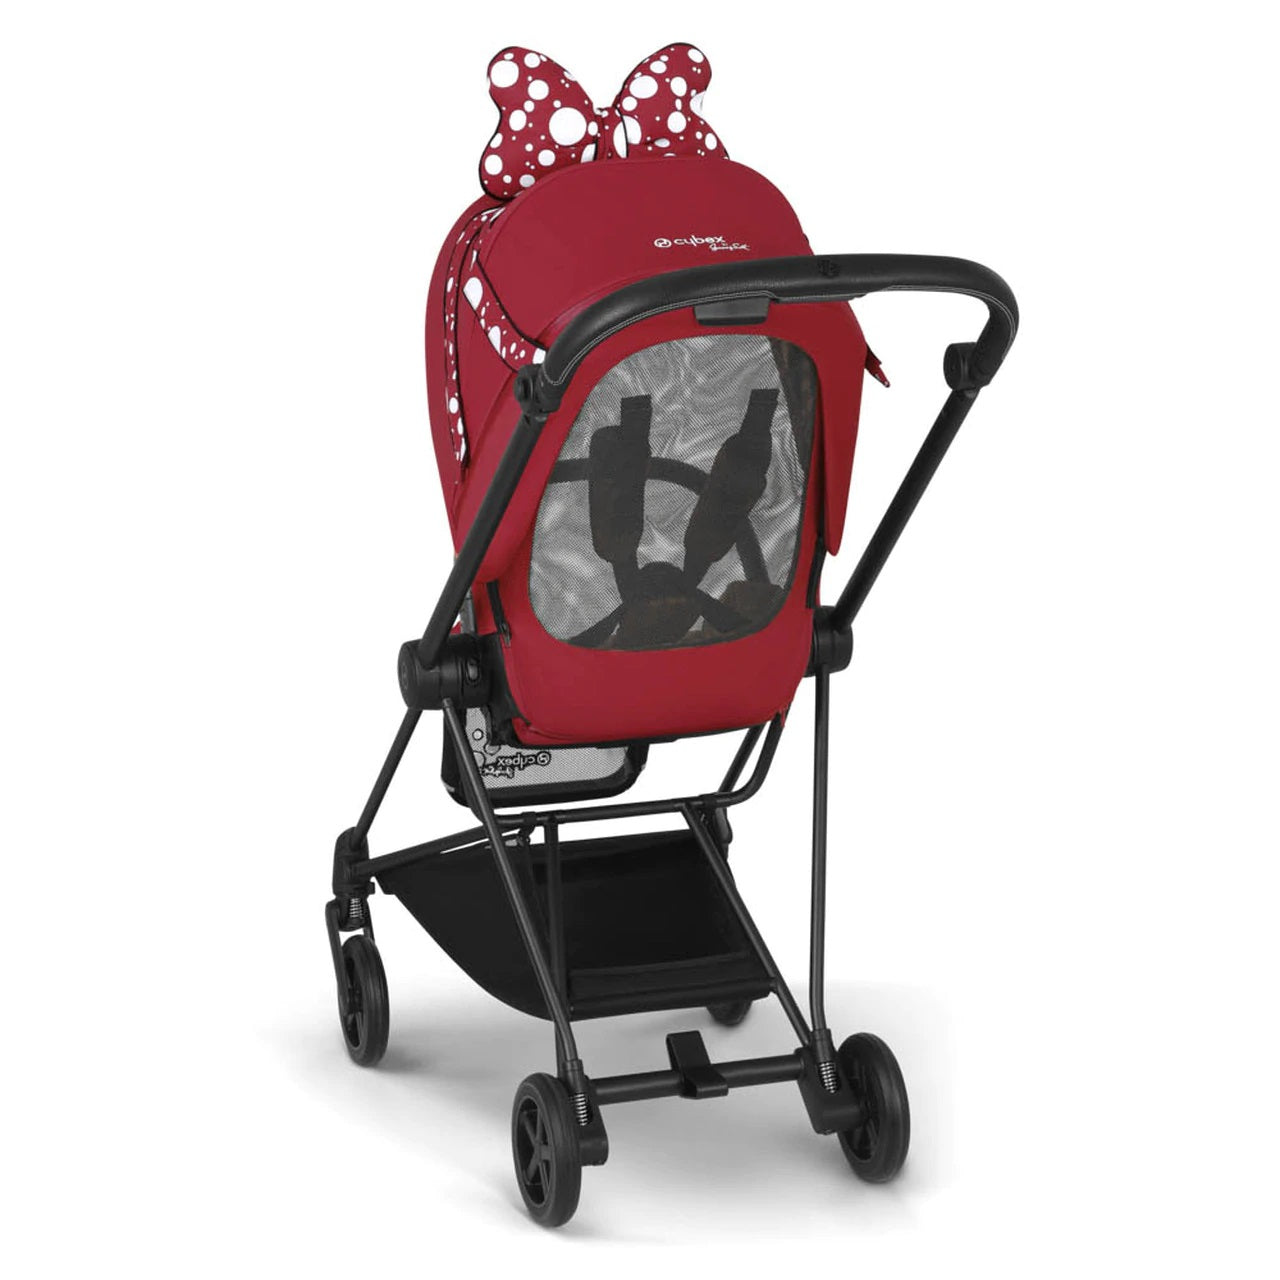 Cybex Mios Travel System with Lux Carrycot - Petticoat